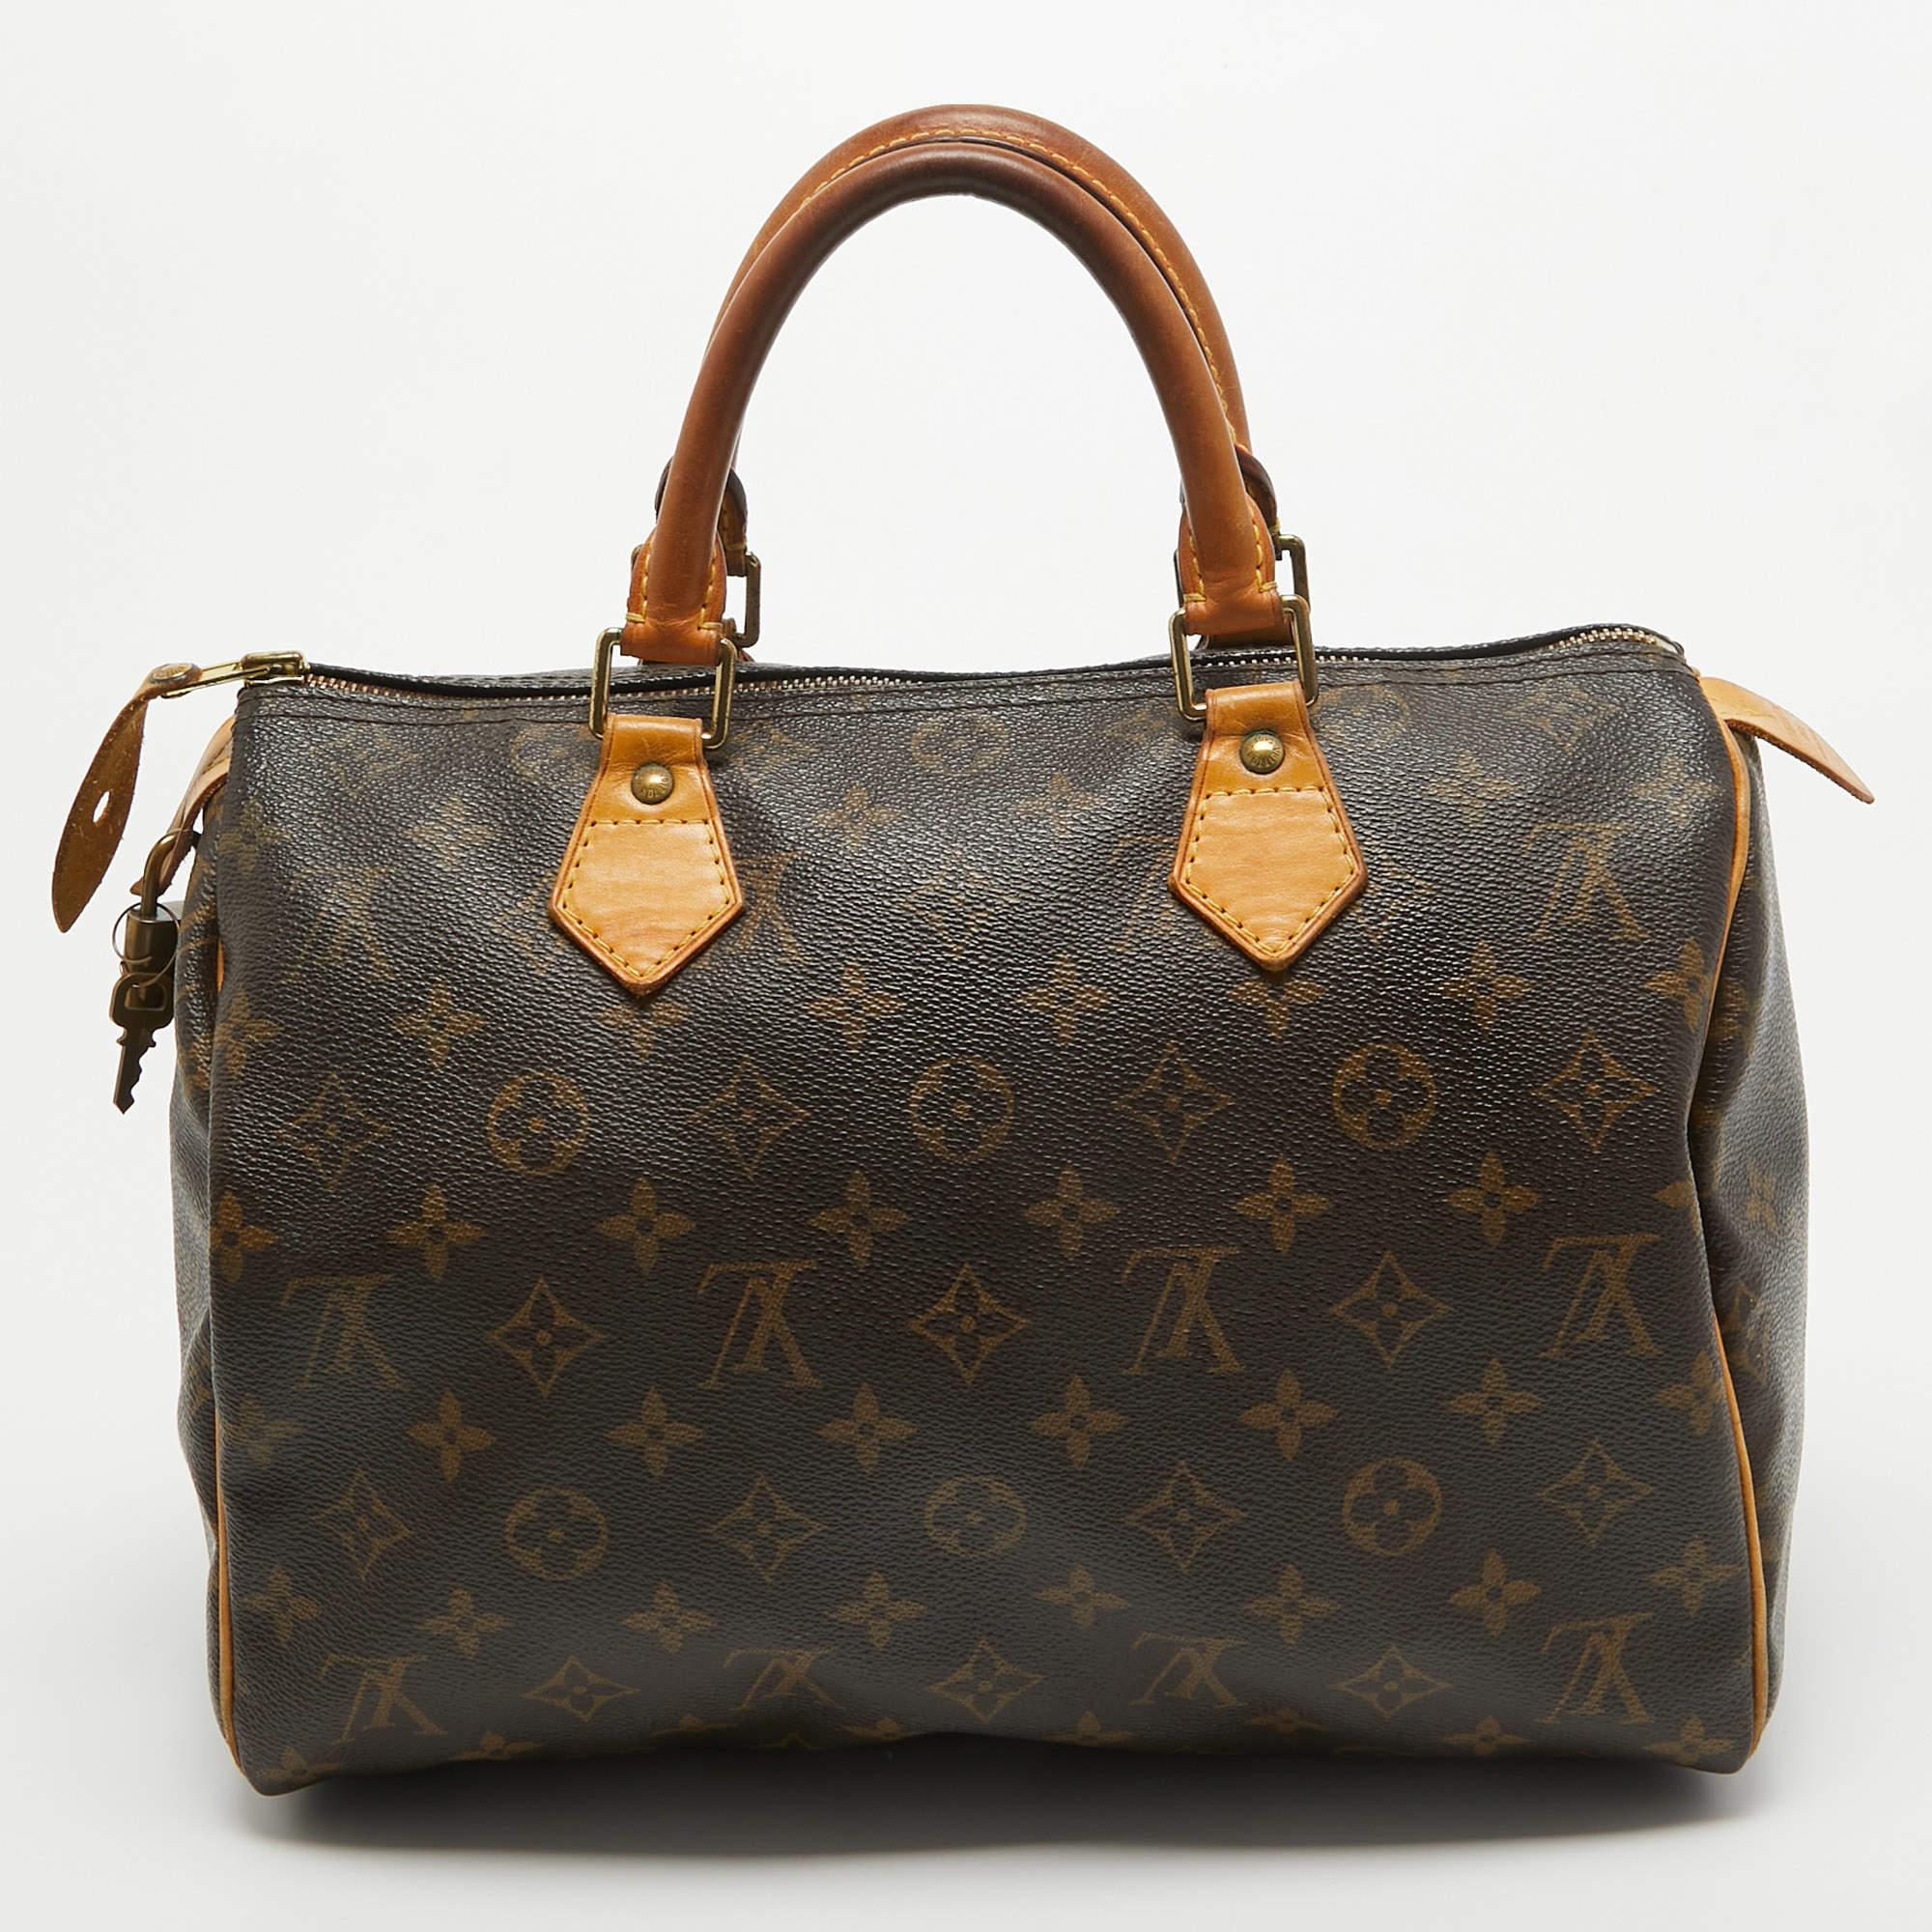 Created to provide you with everyday ease, this Louis Vuitton Speedy 30 bag features dual handles and a roomy canvas-lined interior. The usage of the signature monogram canvas in its construction offers instant brand identification. Gold-tone